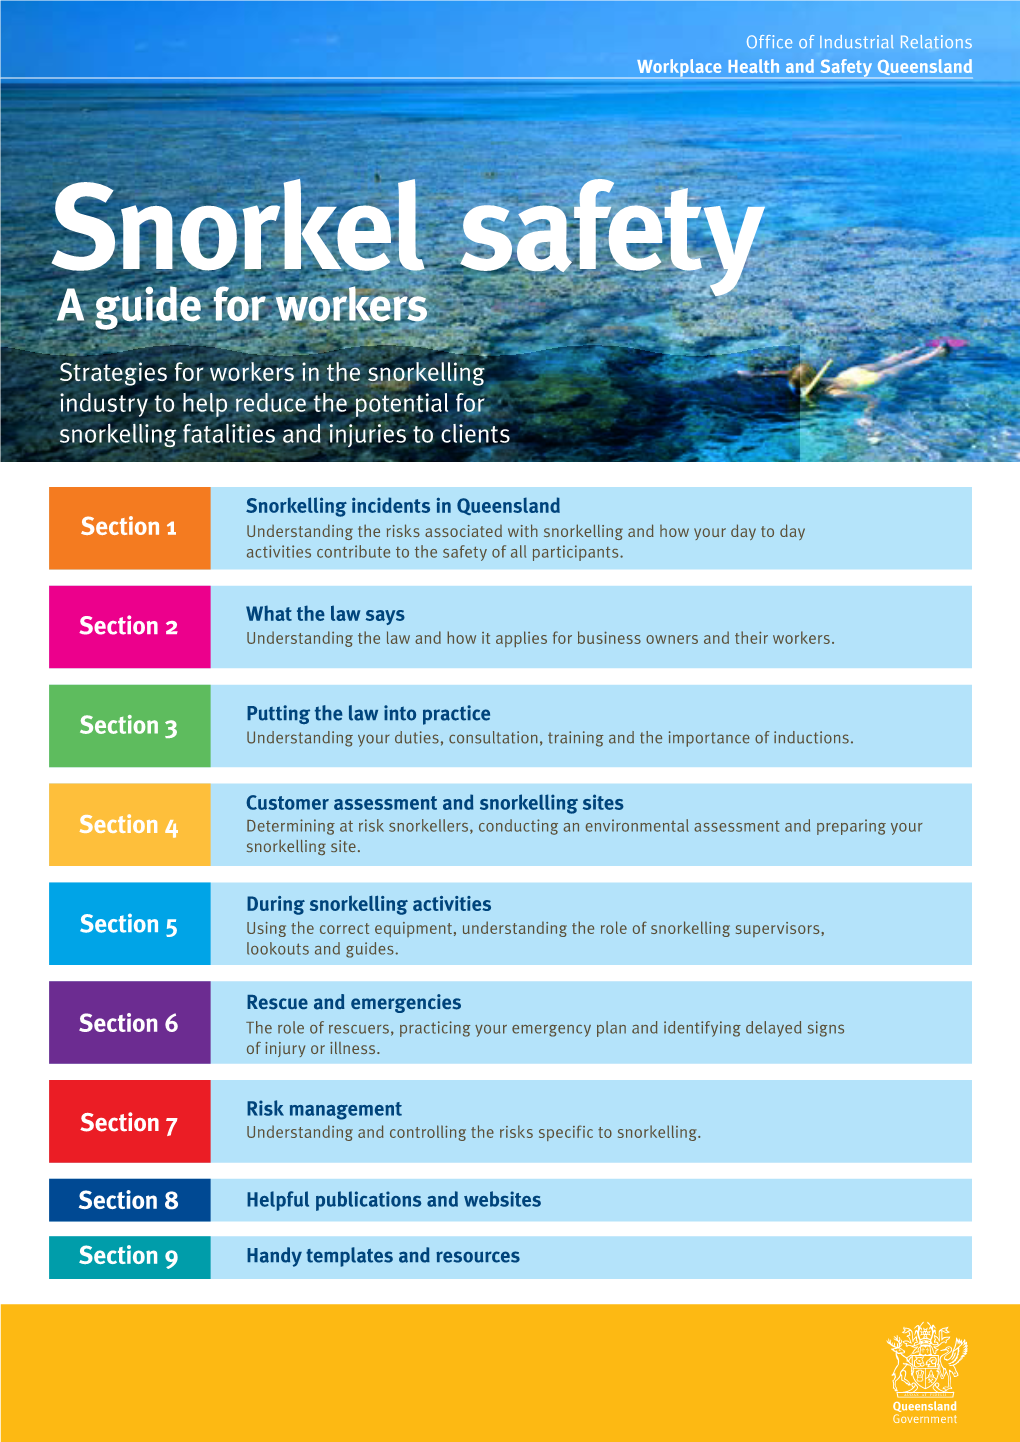 Snorkel Safety: a Guide for Workers Worksafe.Qld.Gov.Au 1300 362 128 SECTION 1 2/2